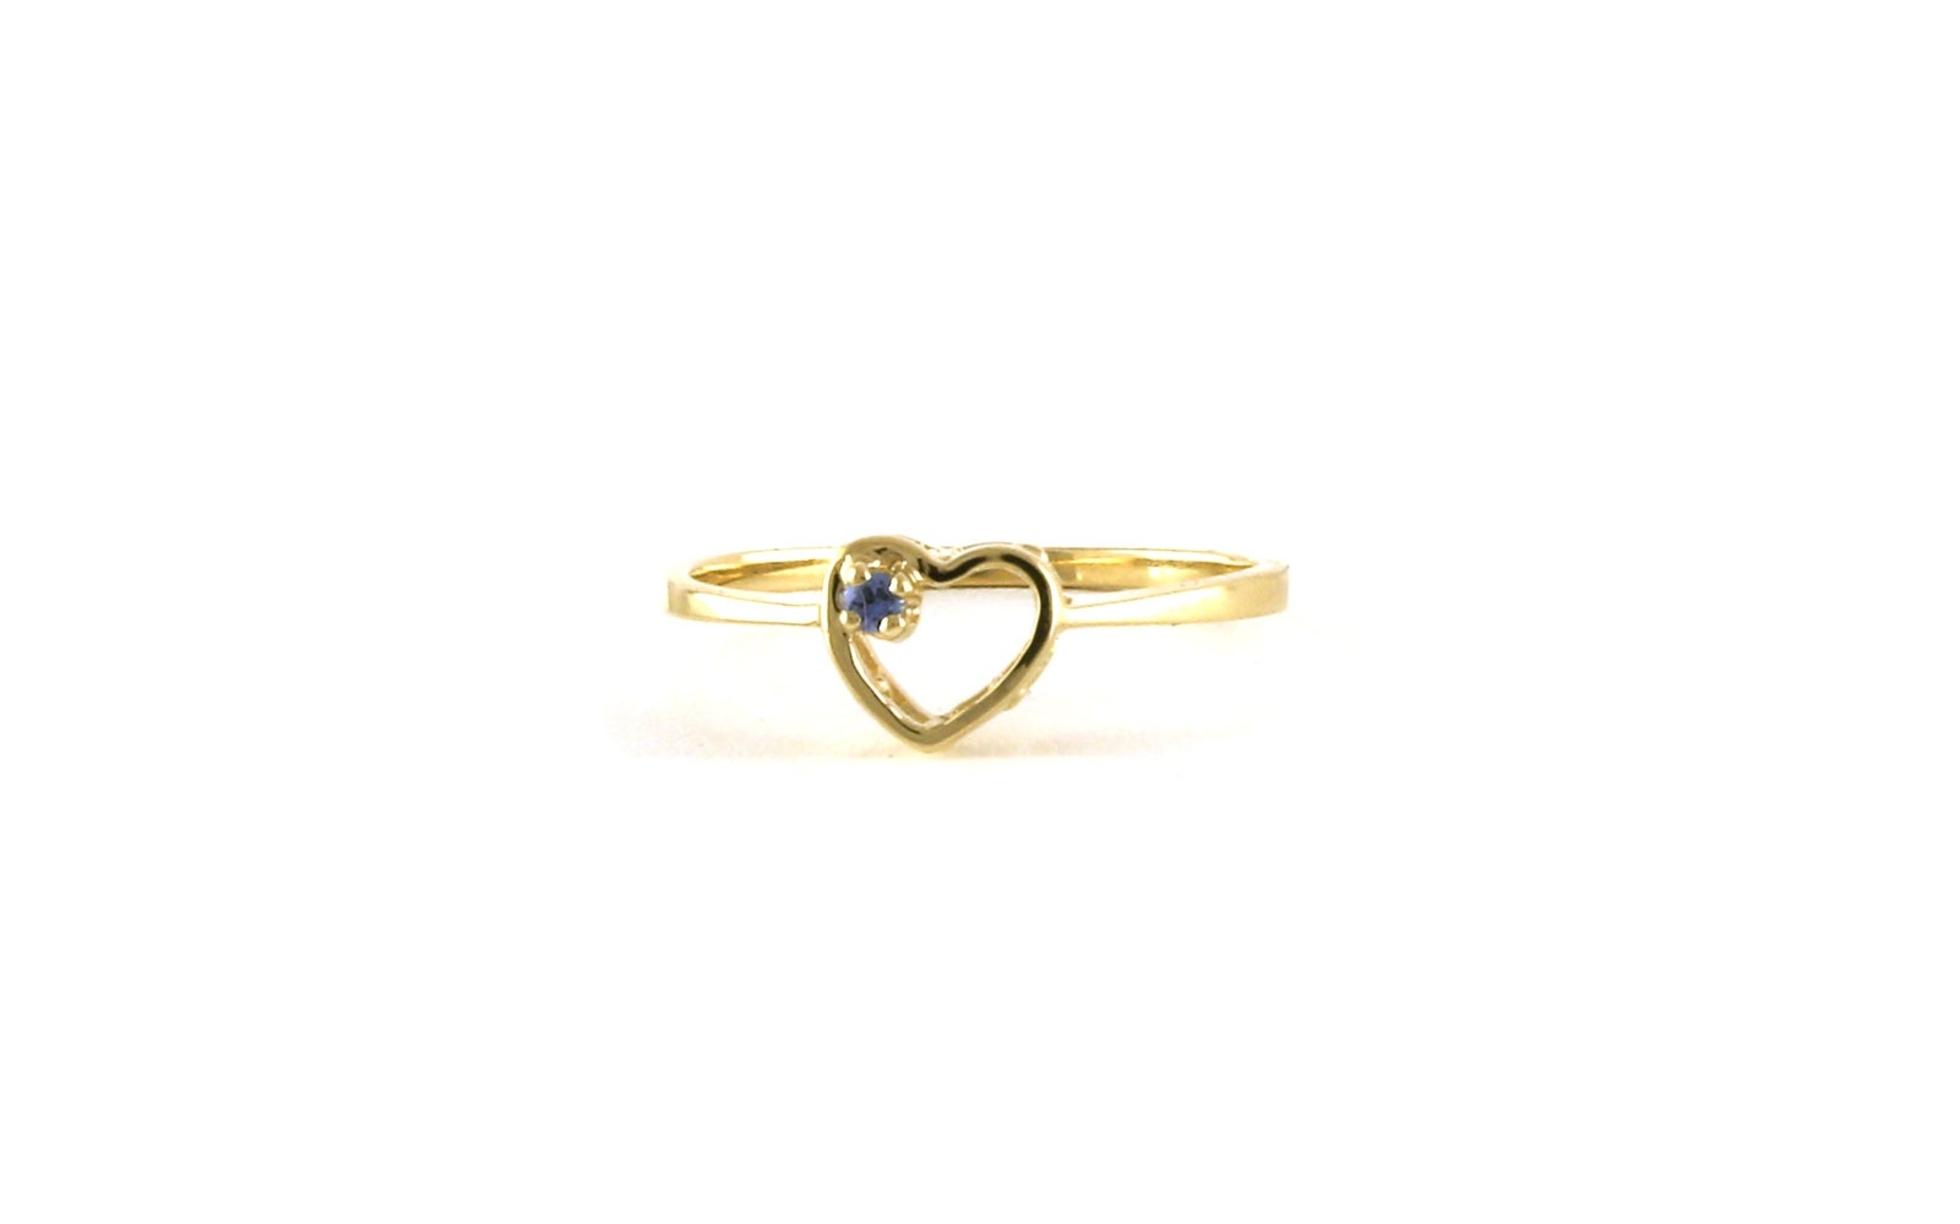 Montana Yogo Sapphire Heart Ring in Yellow Gold (0.03cts)